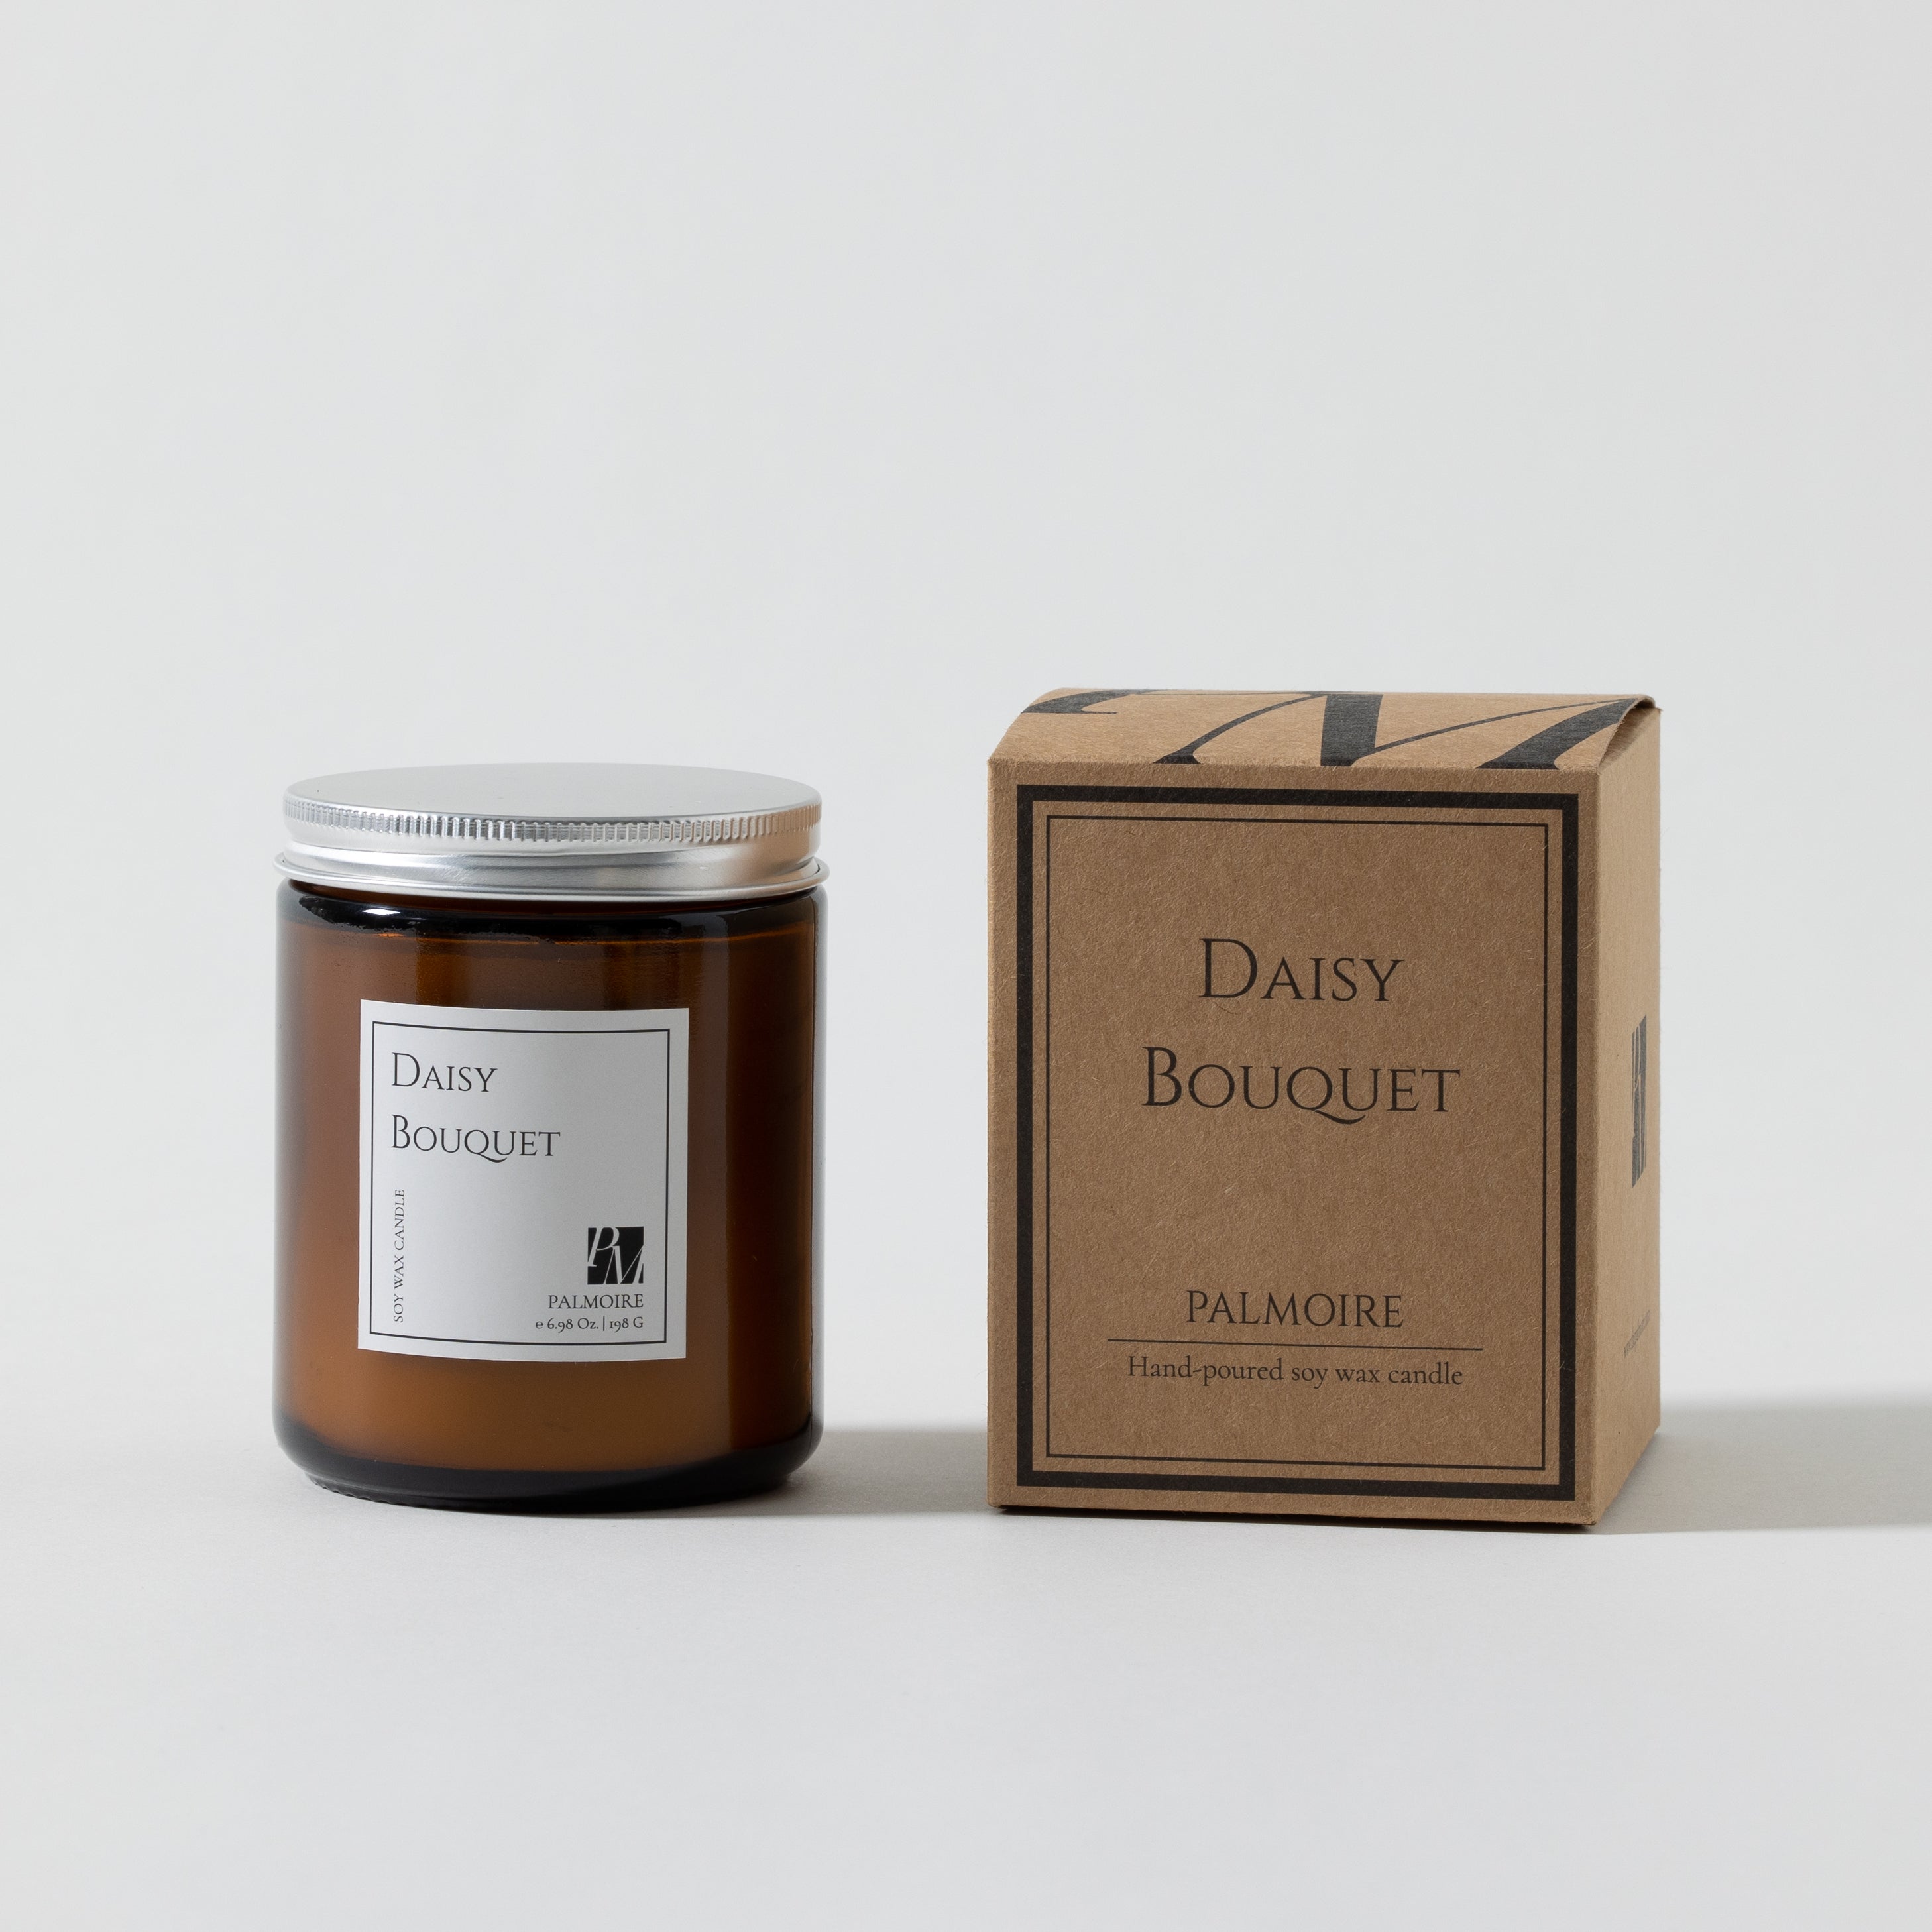 Daisy Bouquet Soy Wax Candle